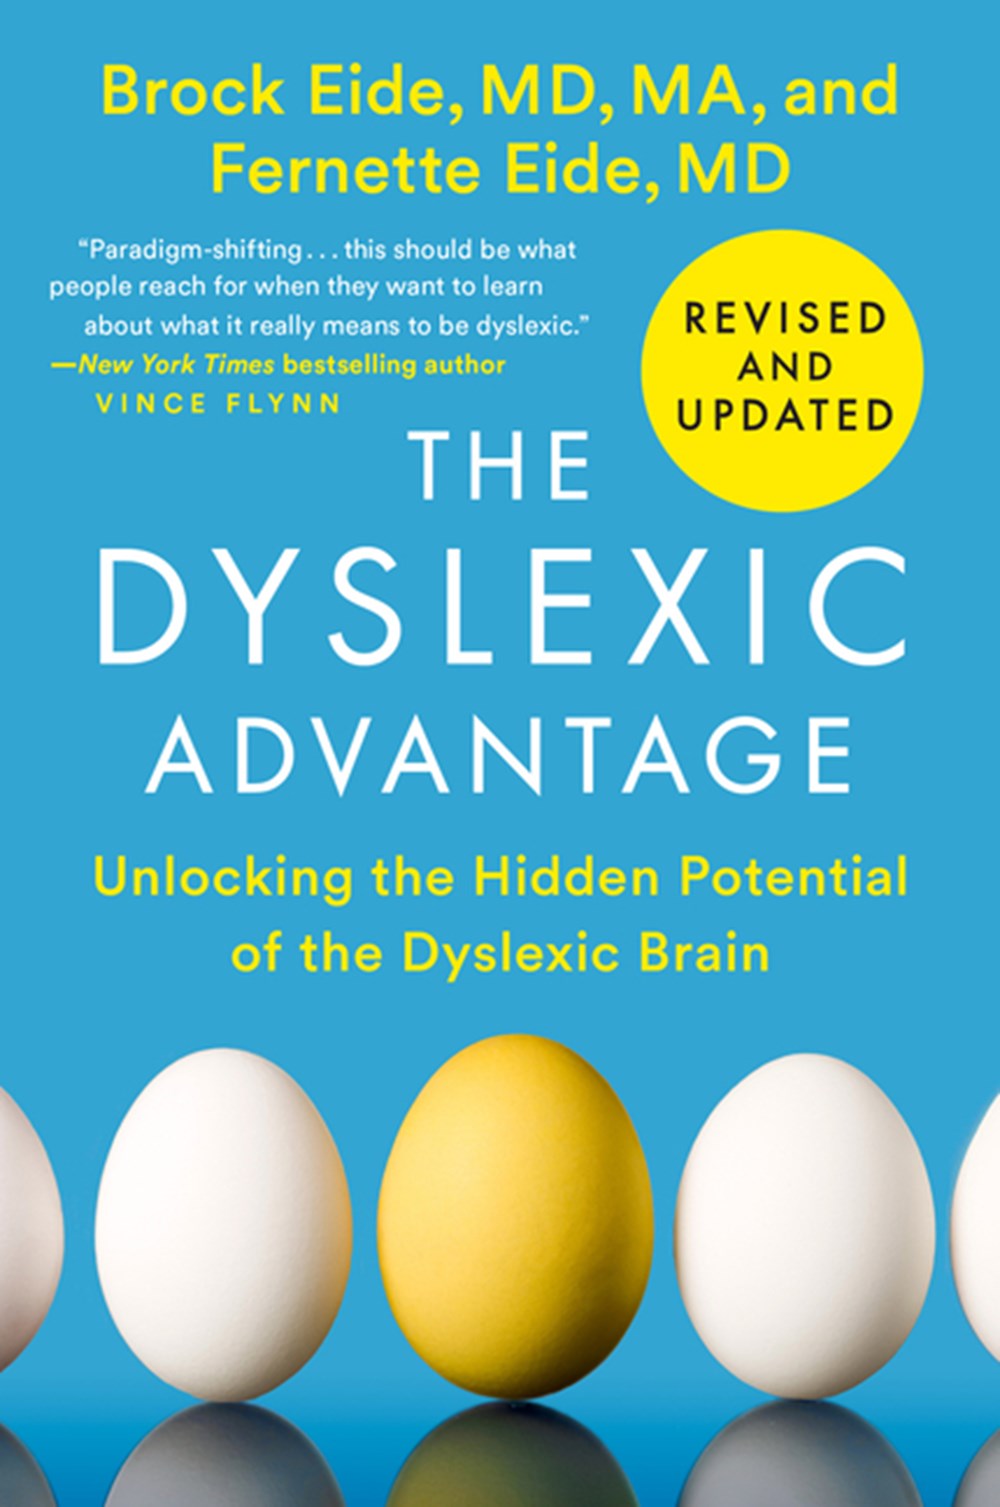 Dyslexic Advantage (Revised and Updated): Unlocking the Hidden Potential of the Dyslexic Brain